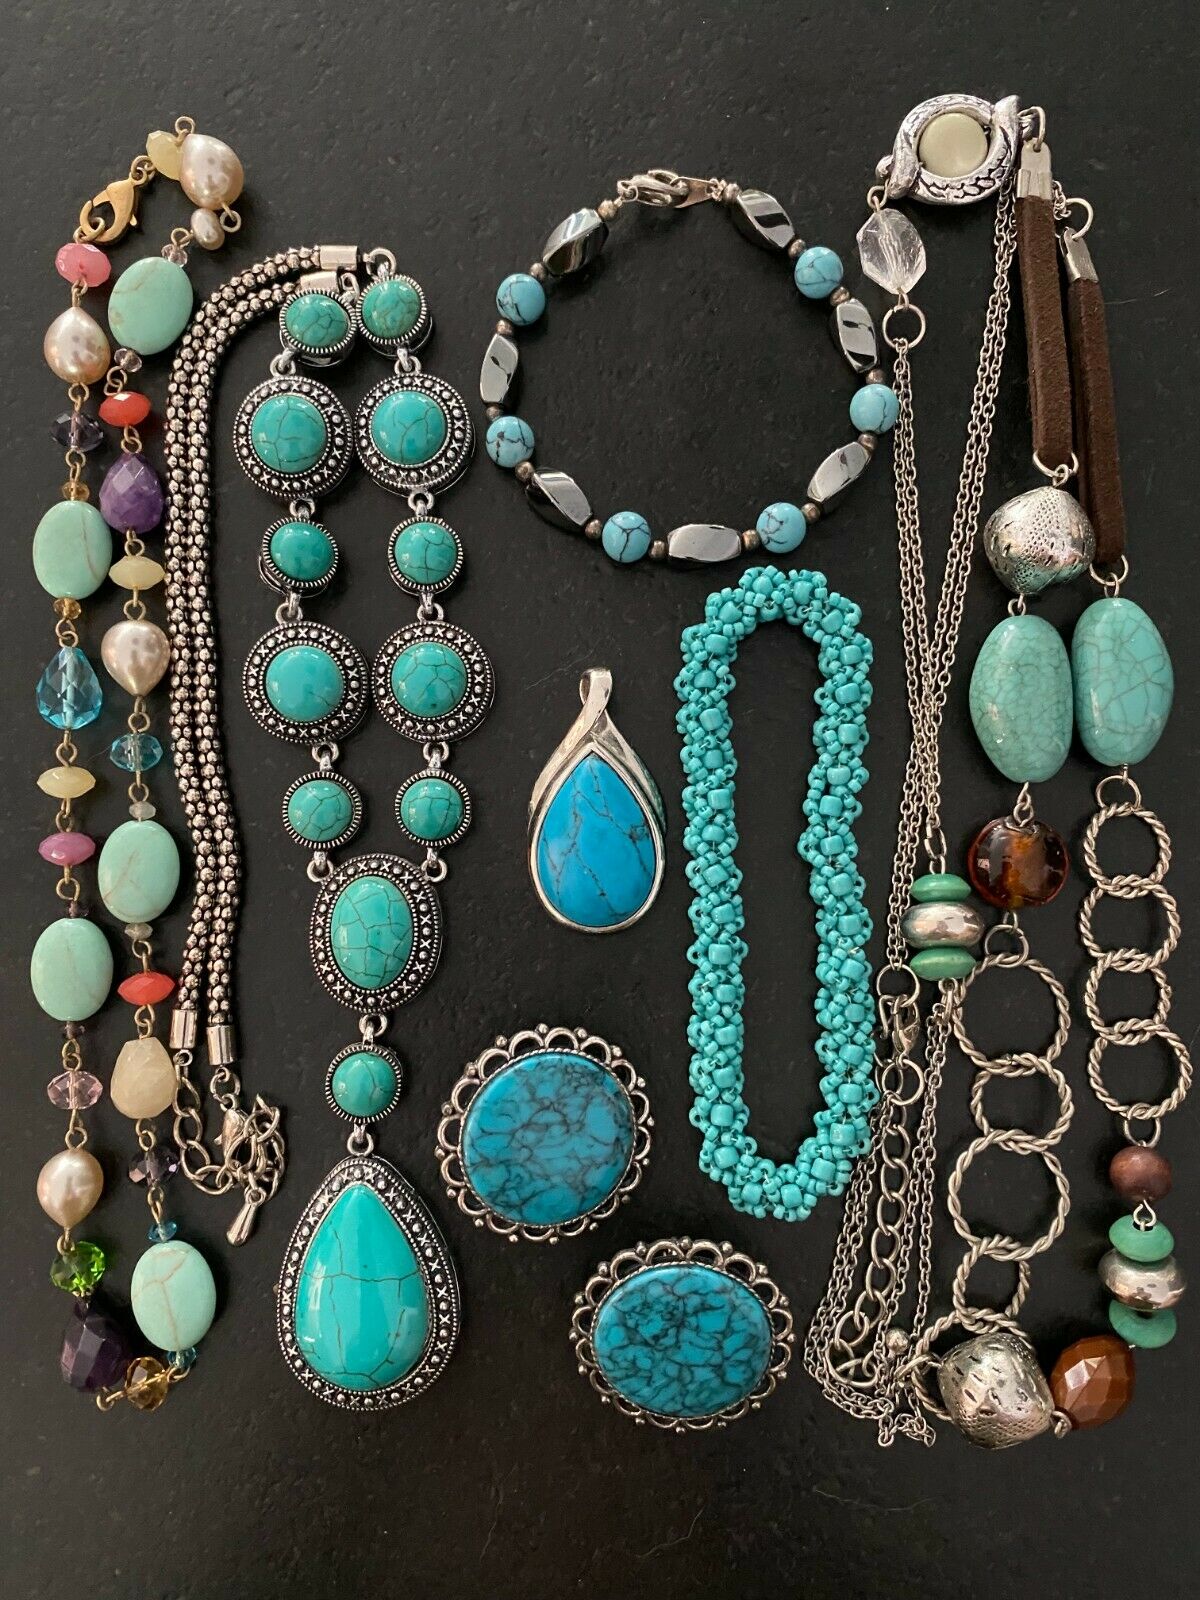 Turquoise Color Costume Jewelry Lot With Lia Sophia Signed Pendant. All Wearable